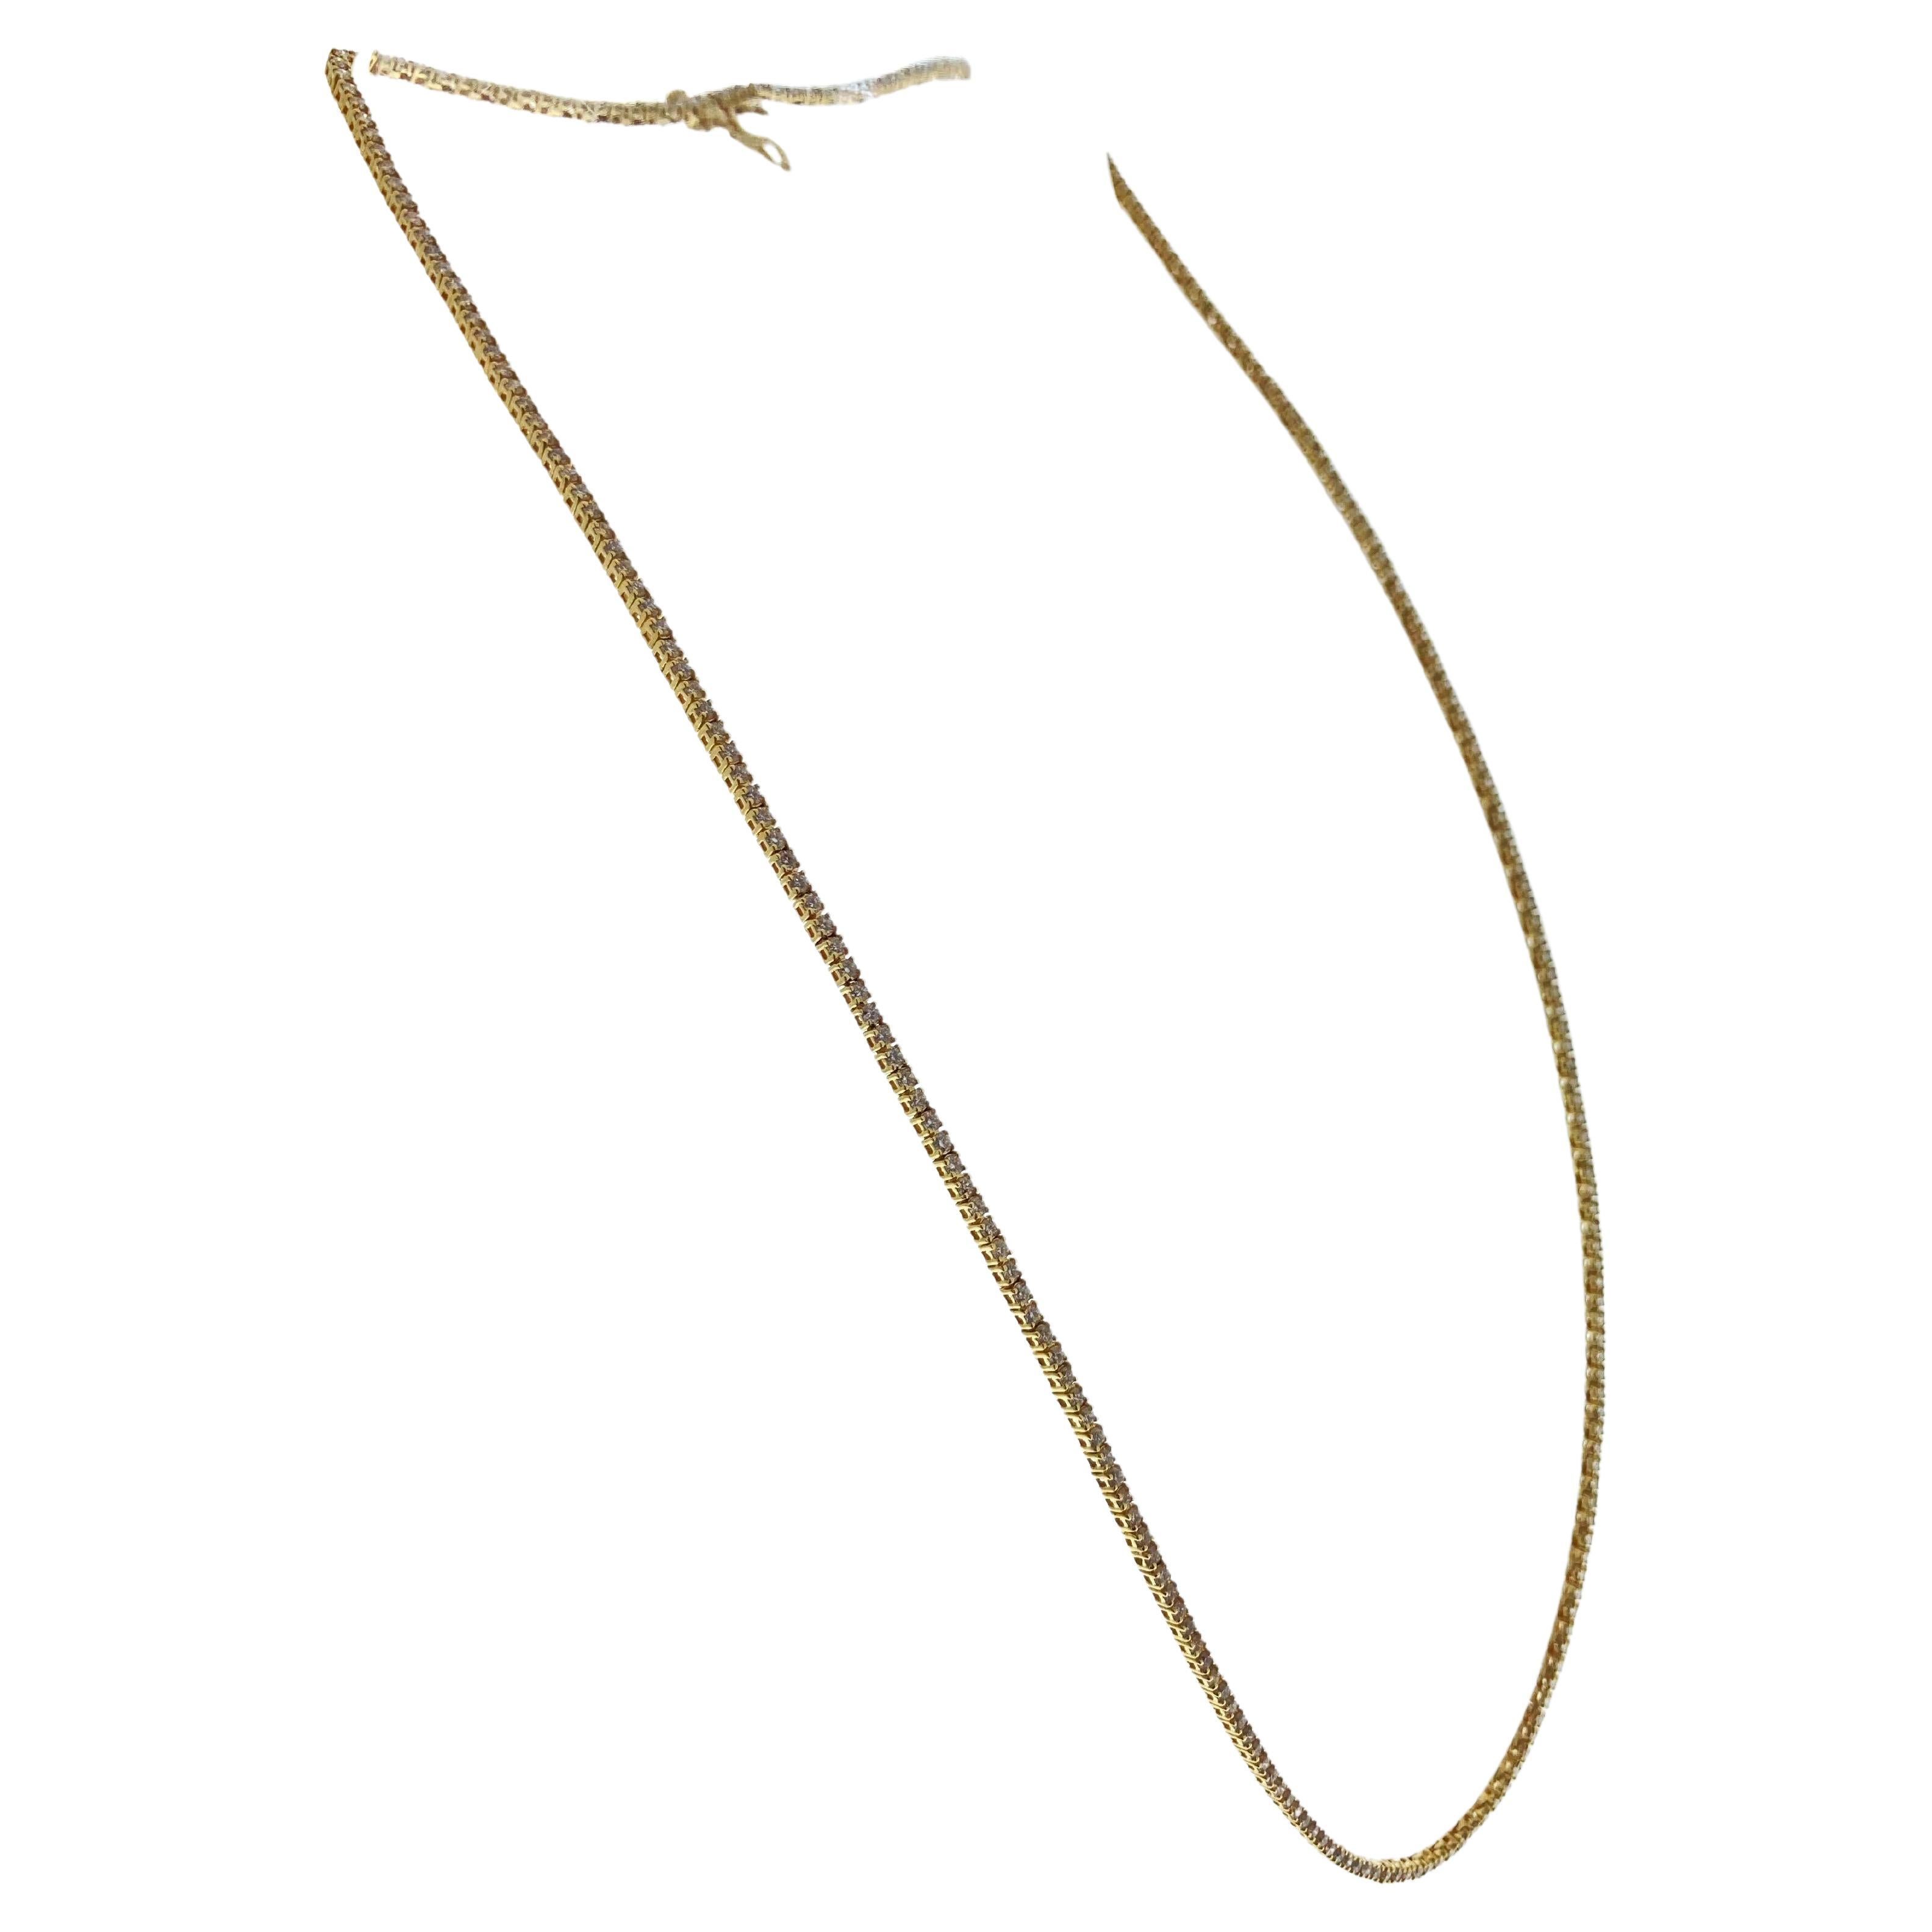 3.00 Carat Round Diamond Tennis Necklaces In 14k Yellow Gold For Sale